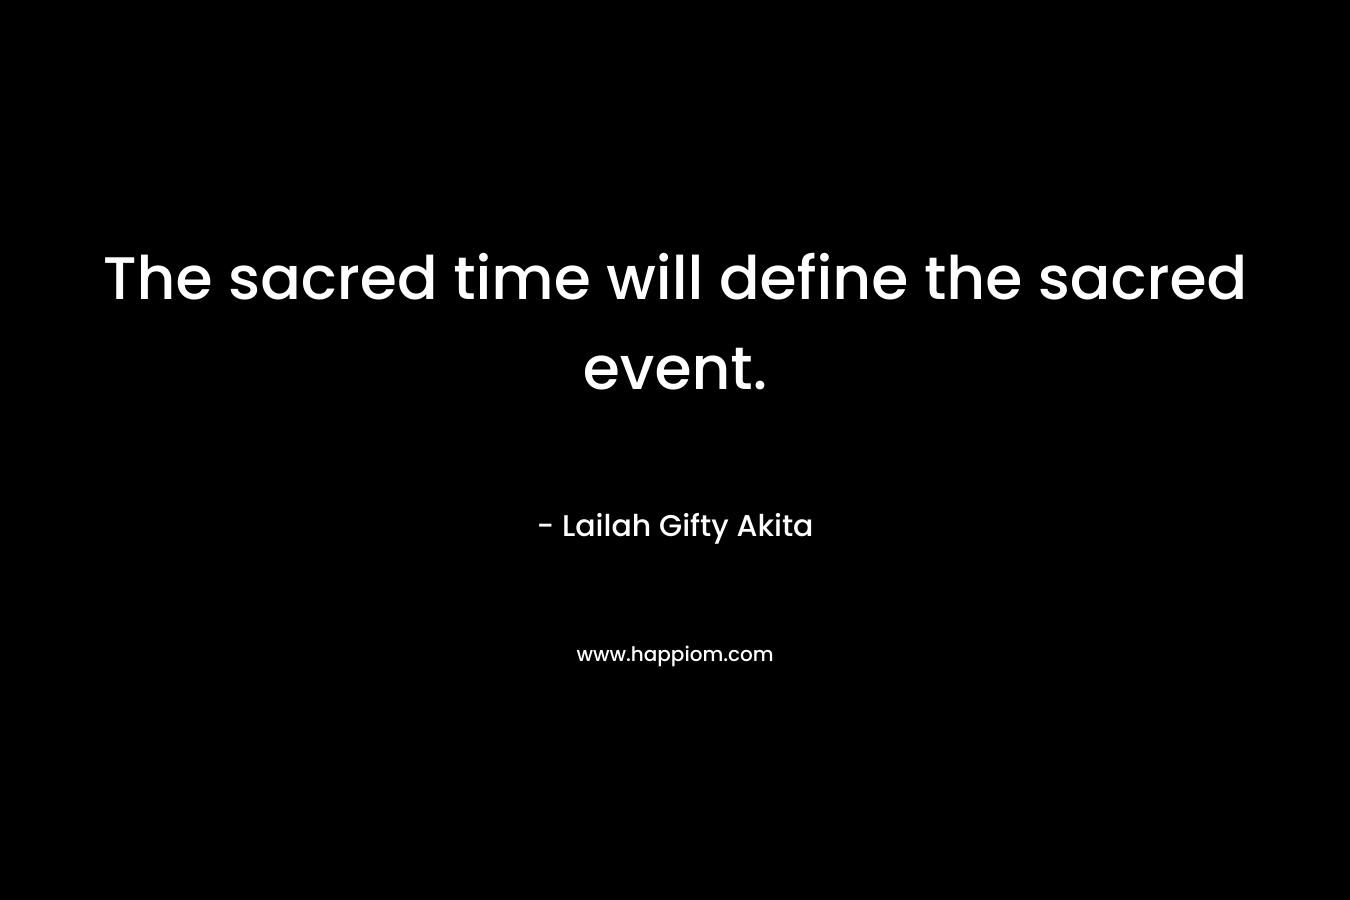 The sacred time will define the sacred event.